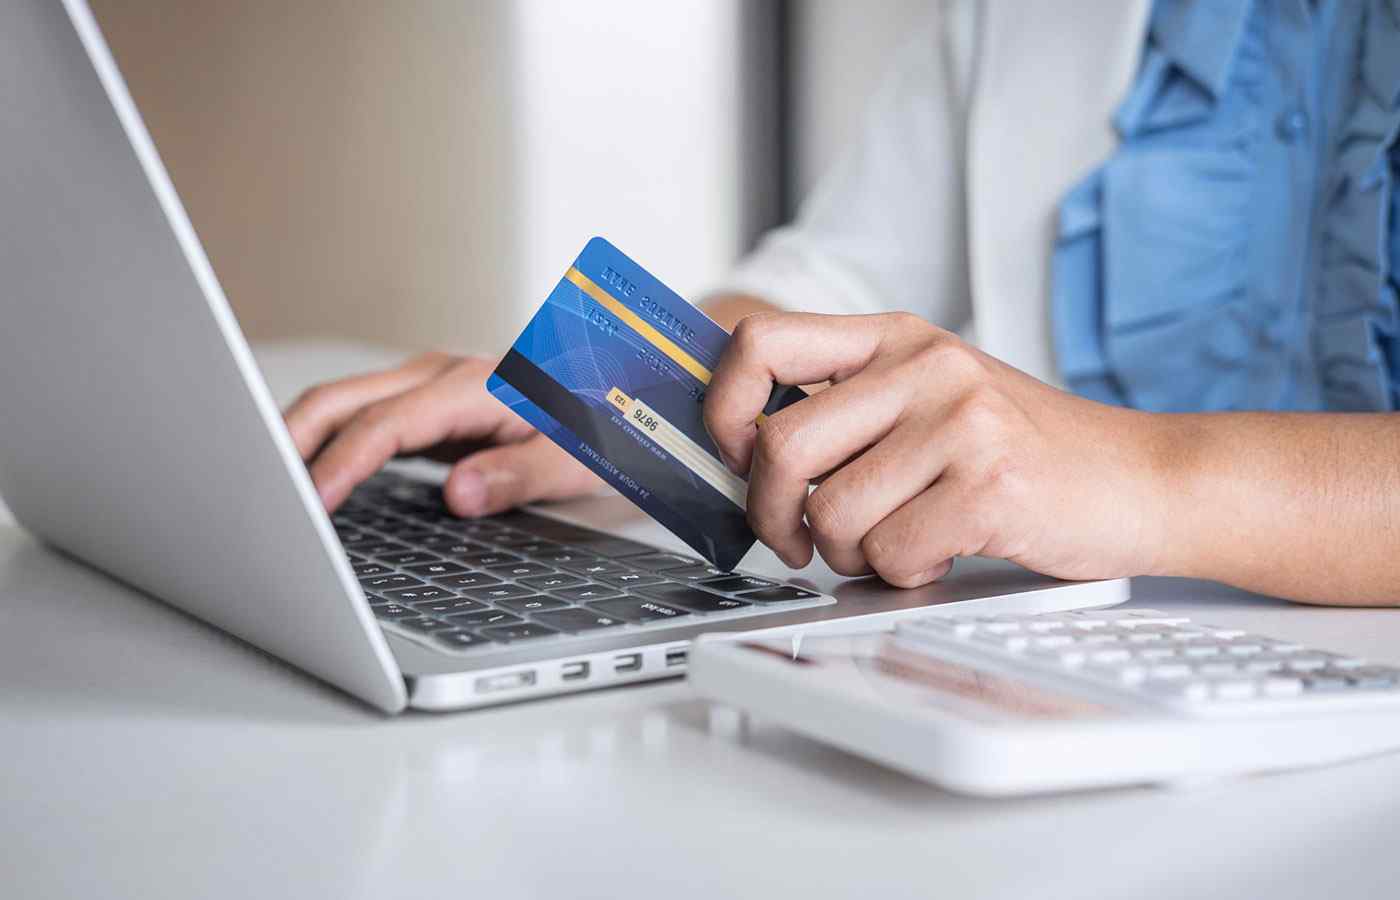 Man using credit card to buy things online